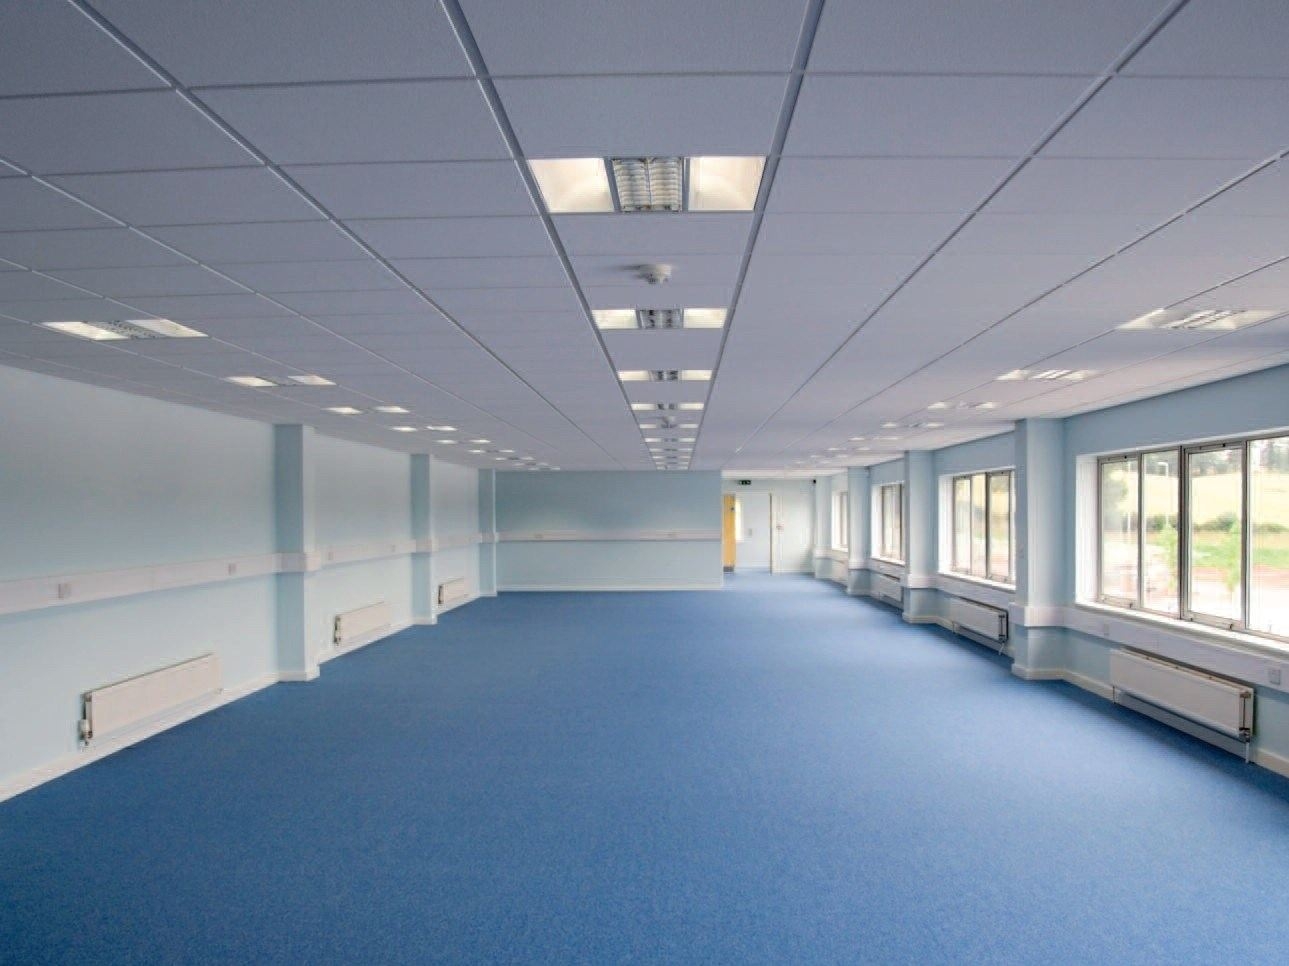 Permalink to Acrylic Suspended Ceiling Tiles